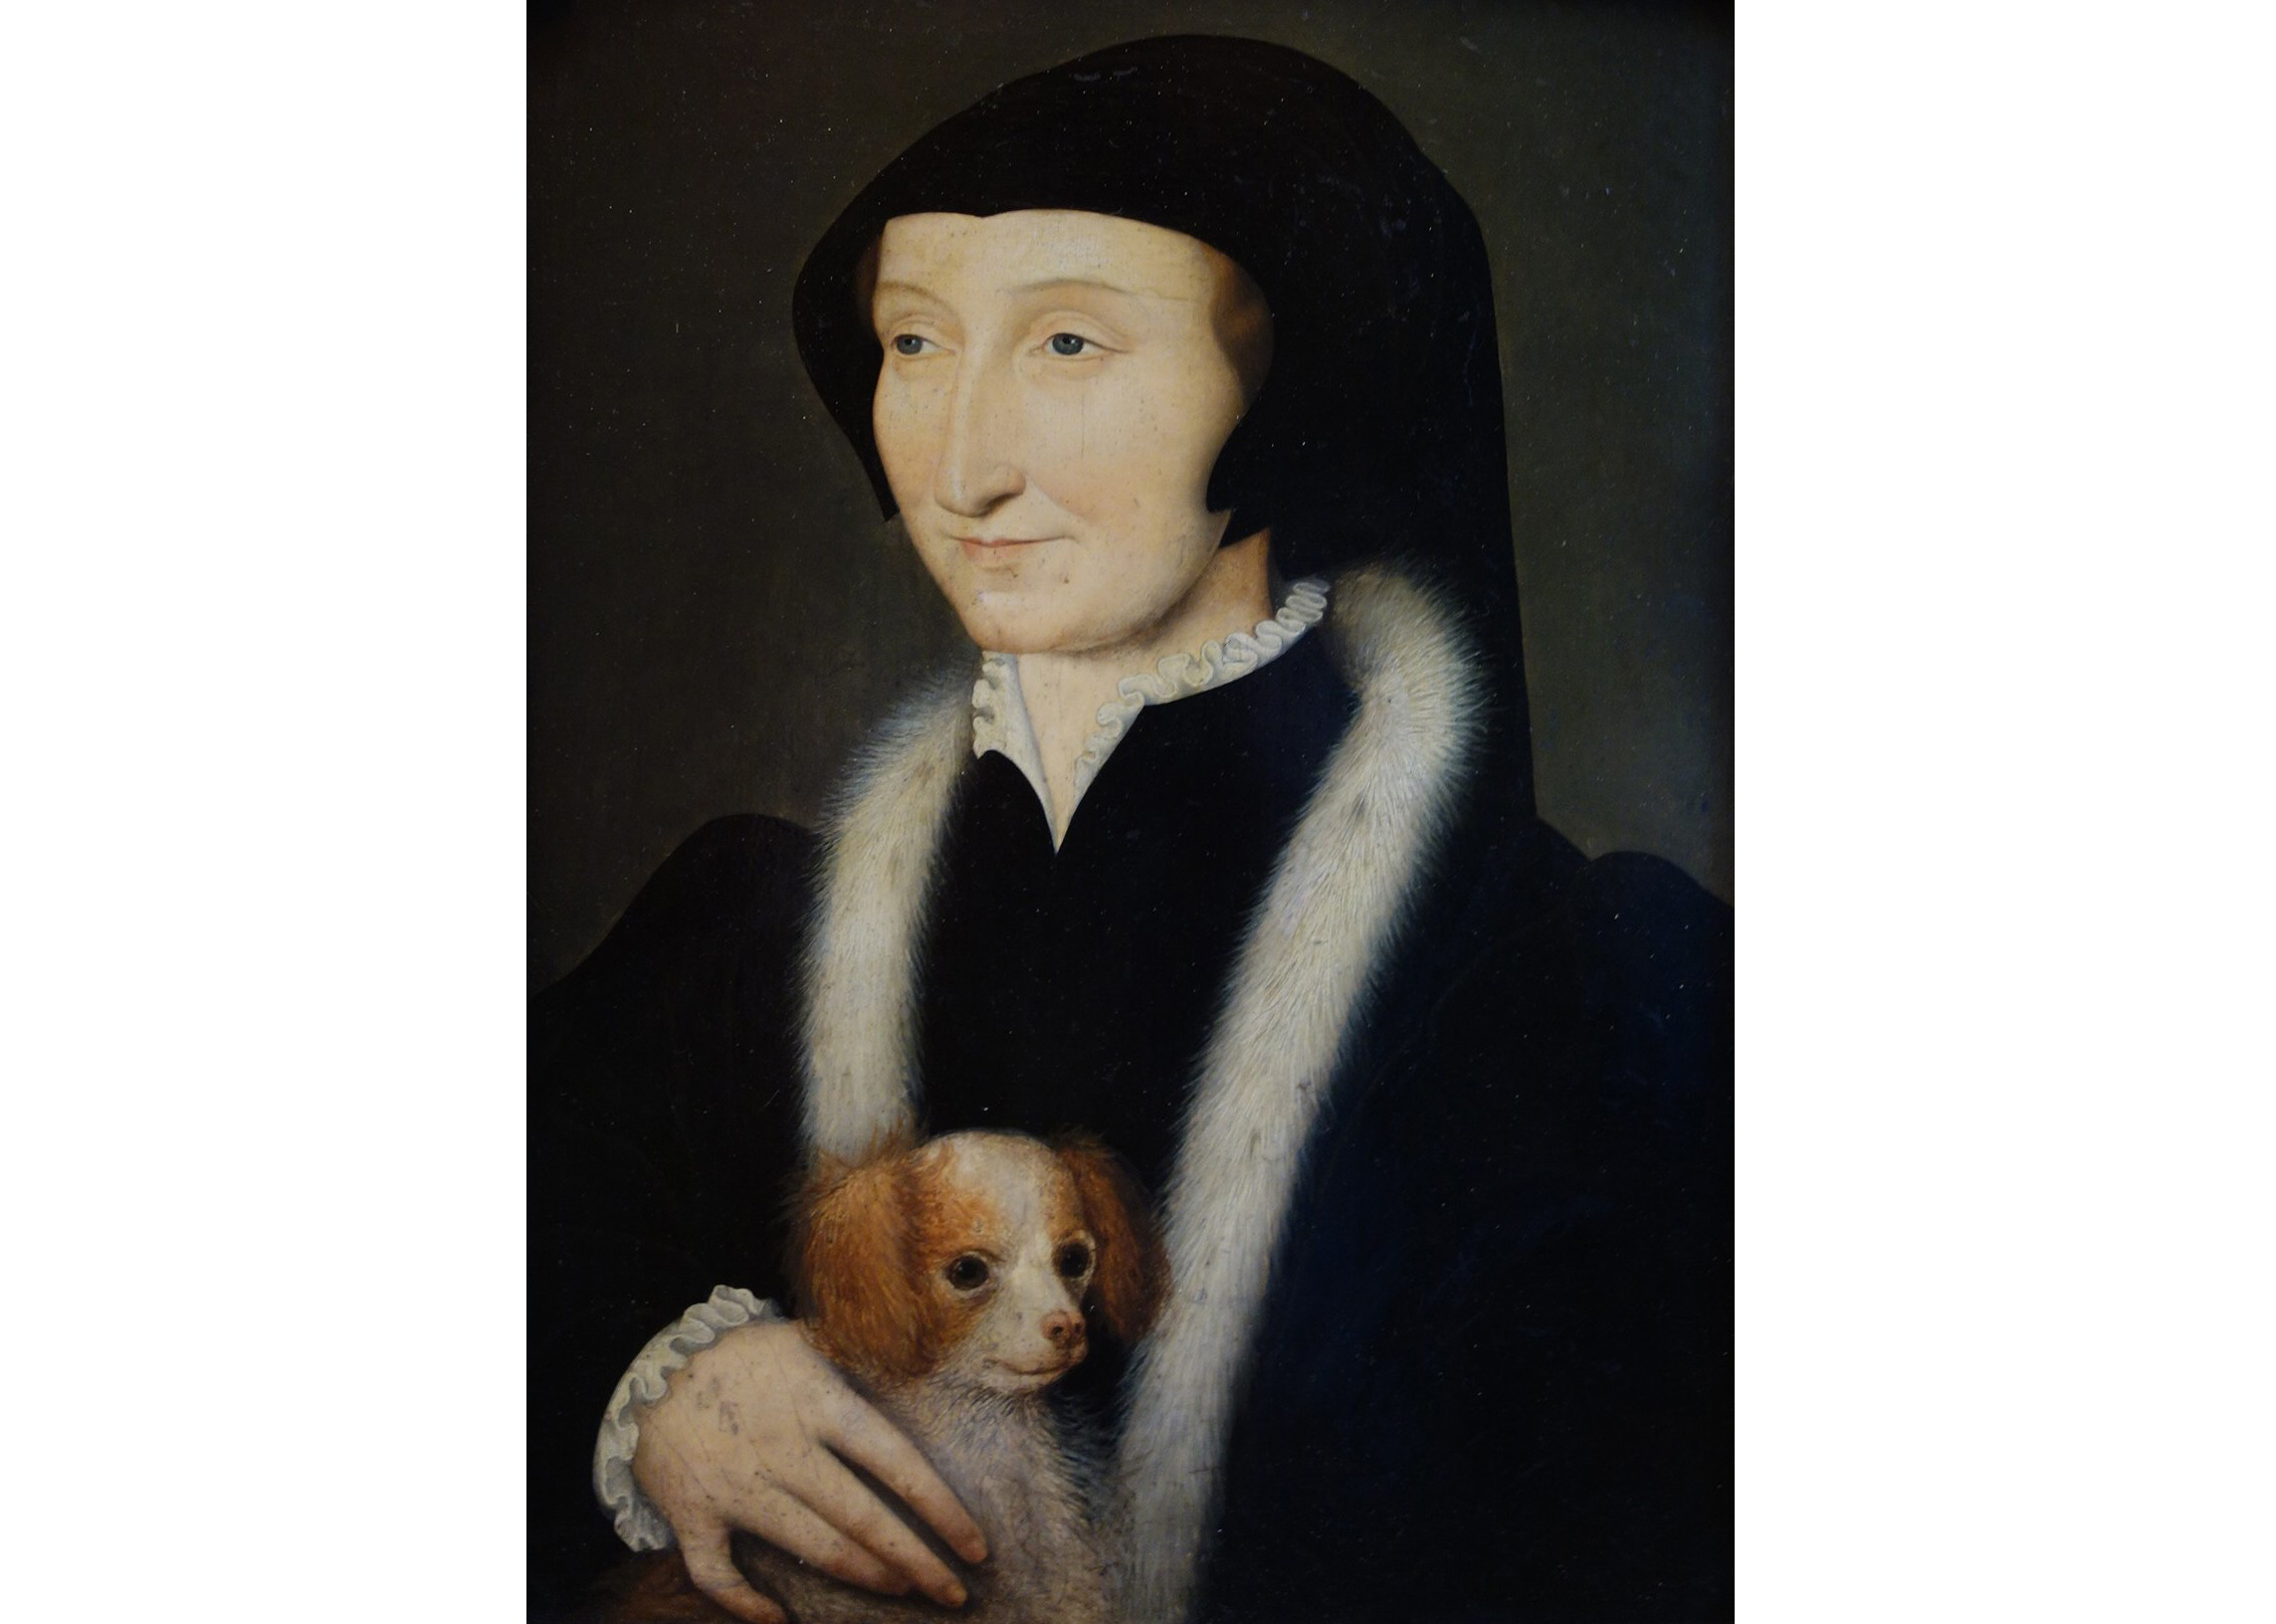 A sixteenth-century older woman dressed in a black dress with an ermine collared coat and black and headdress holding a small lapdog.